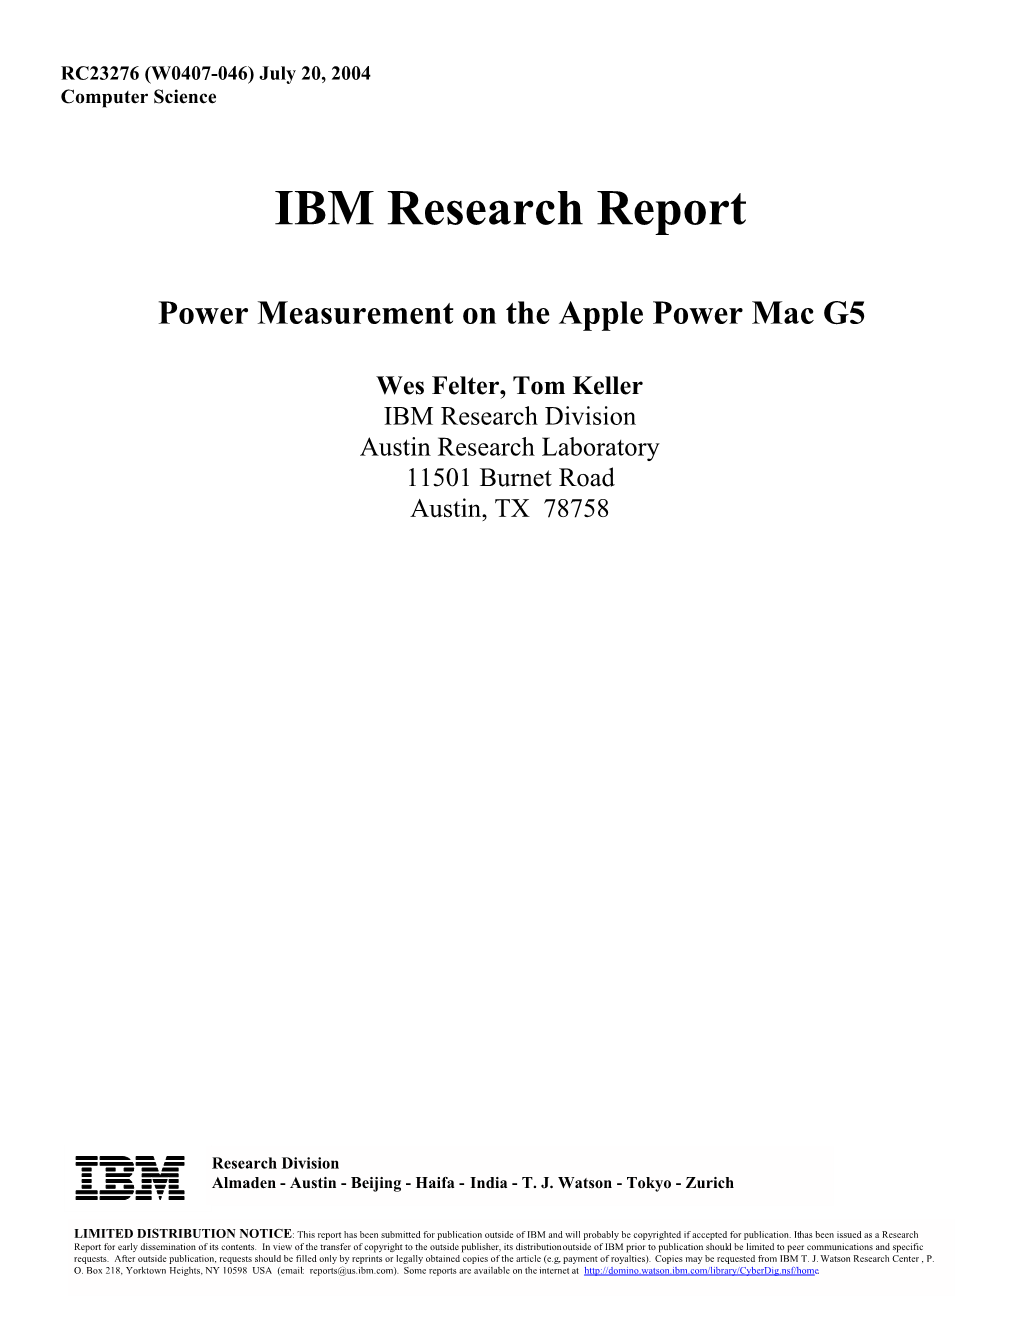 IBM Research Report: Power Measurement of the Apple Power